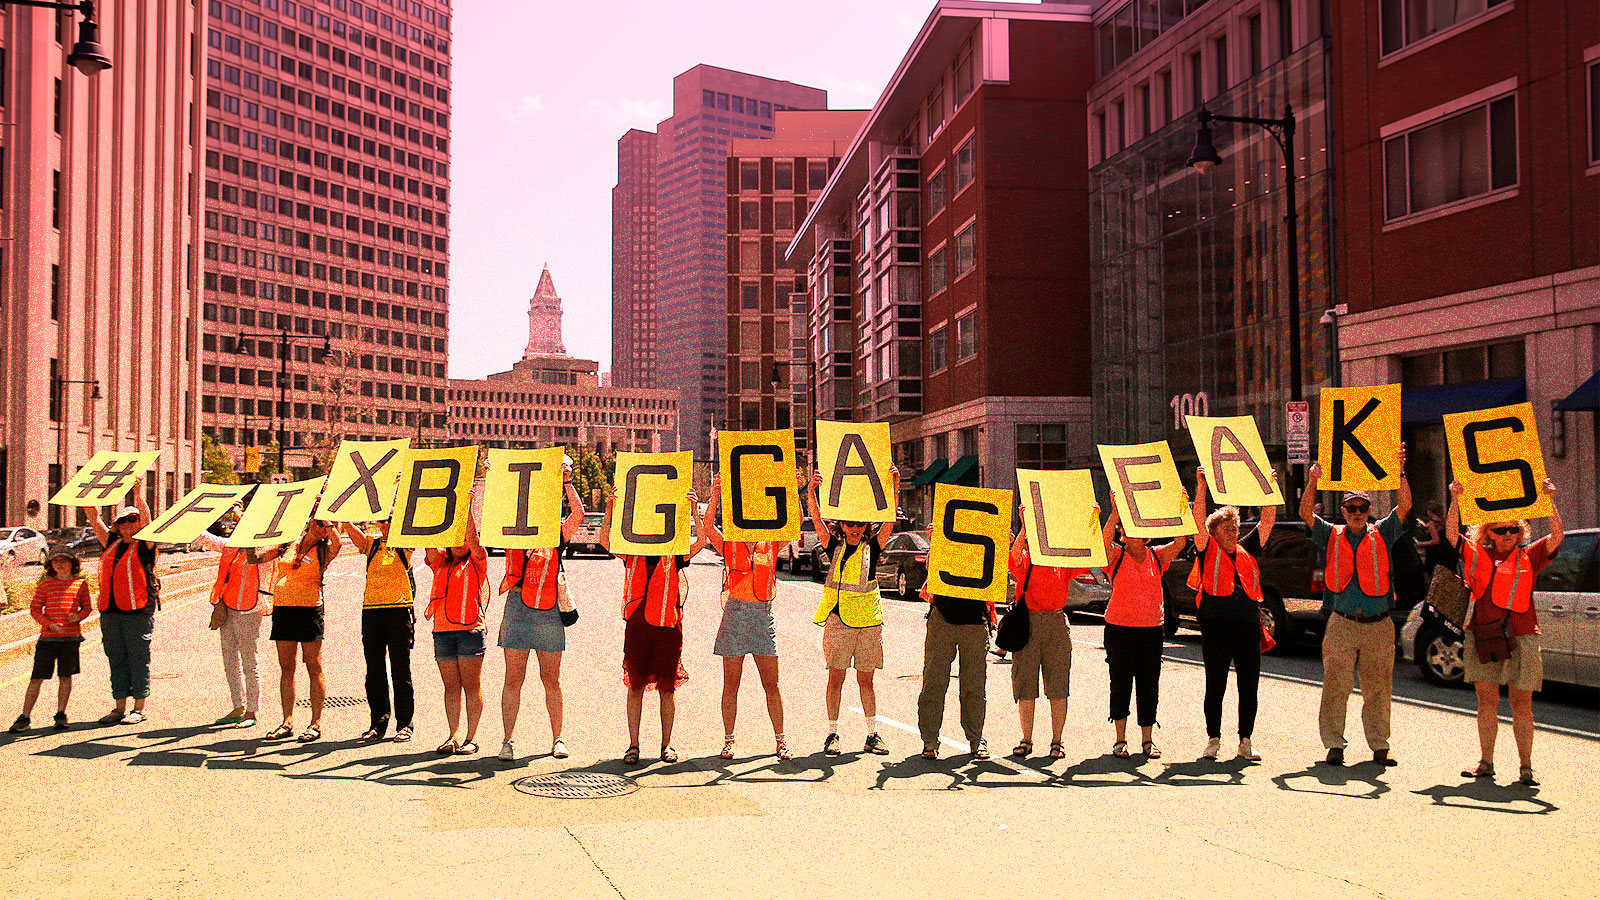 photo of protesters in Boston holding sign that says #FixBigGasLeaks